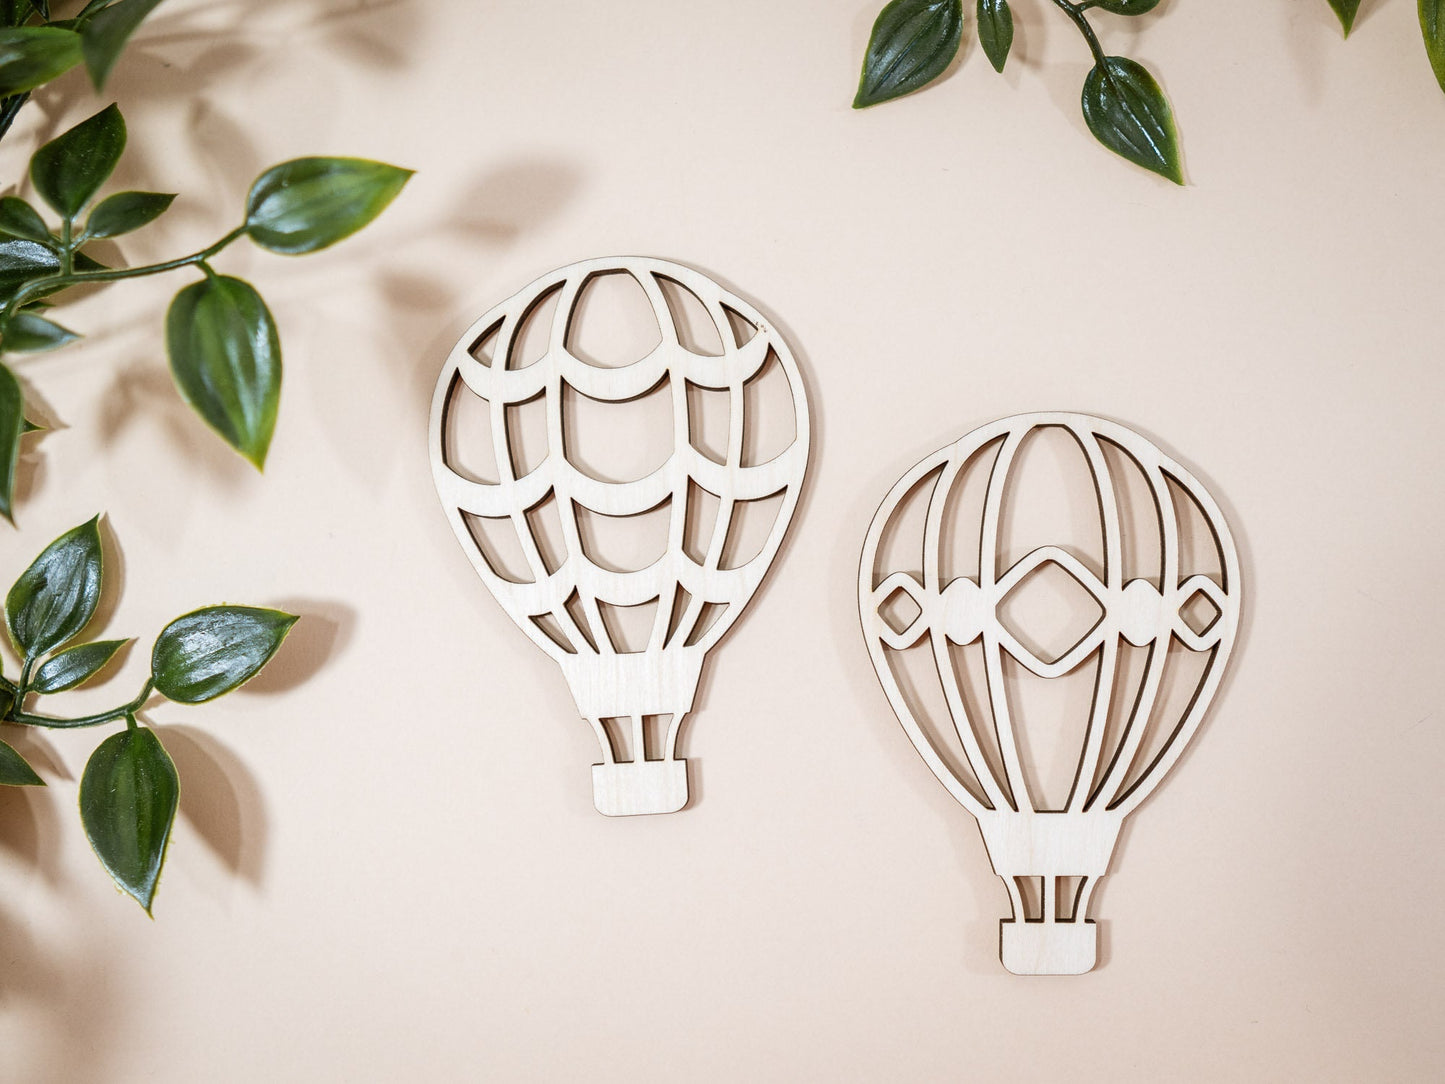 Hot Air Balloon shape for crafts and decorations, Wooden Unfinished shapes, Bedroom, Playroom wall decoration